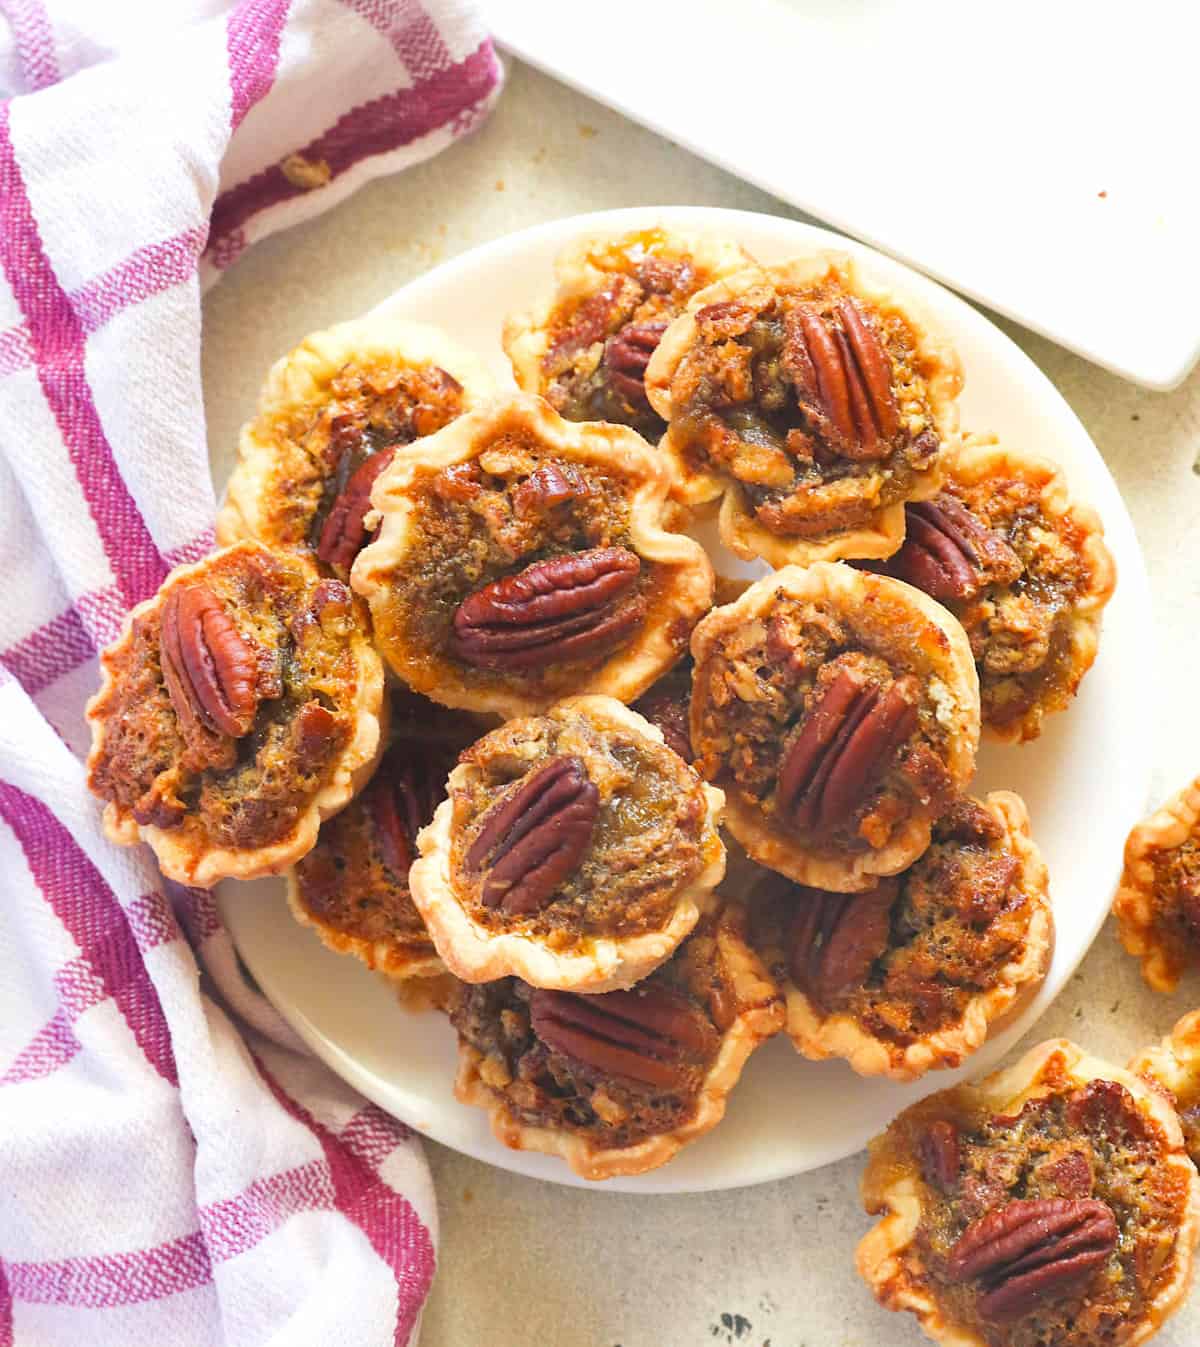 A platter of insanely delicious mini pecan pies